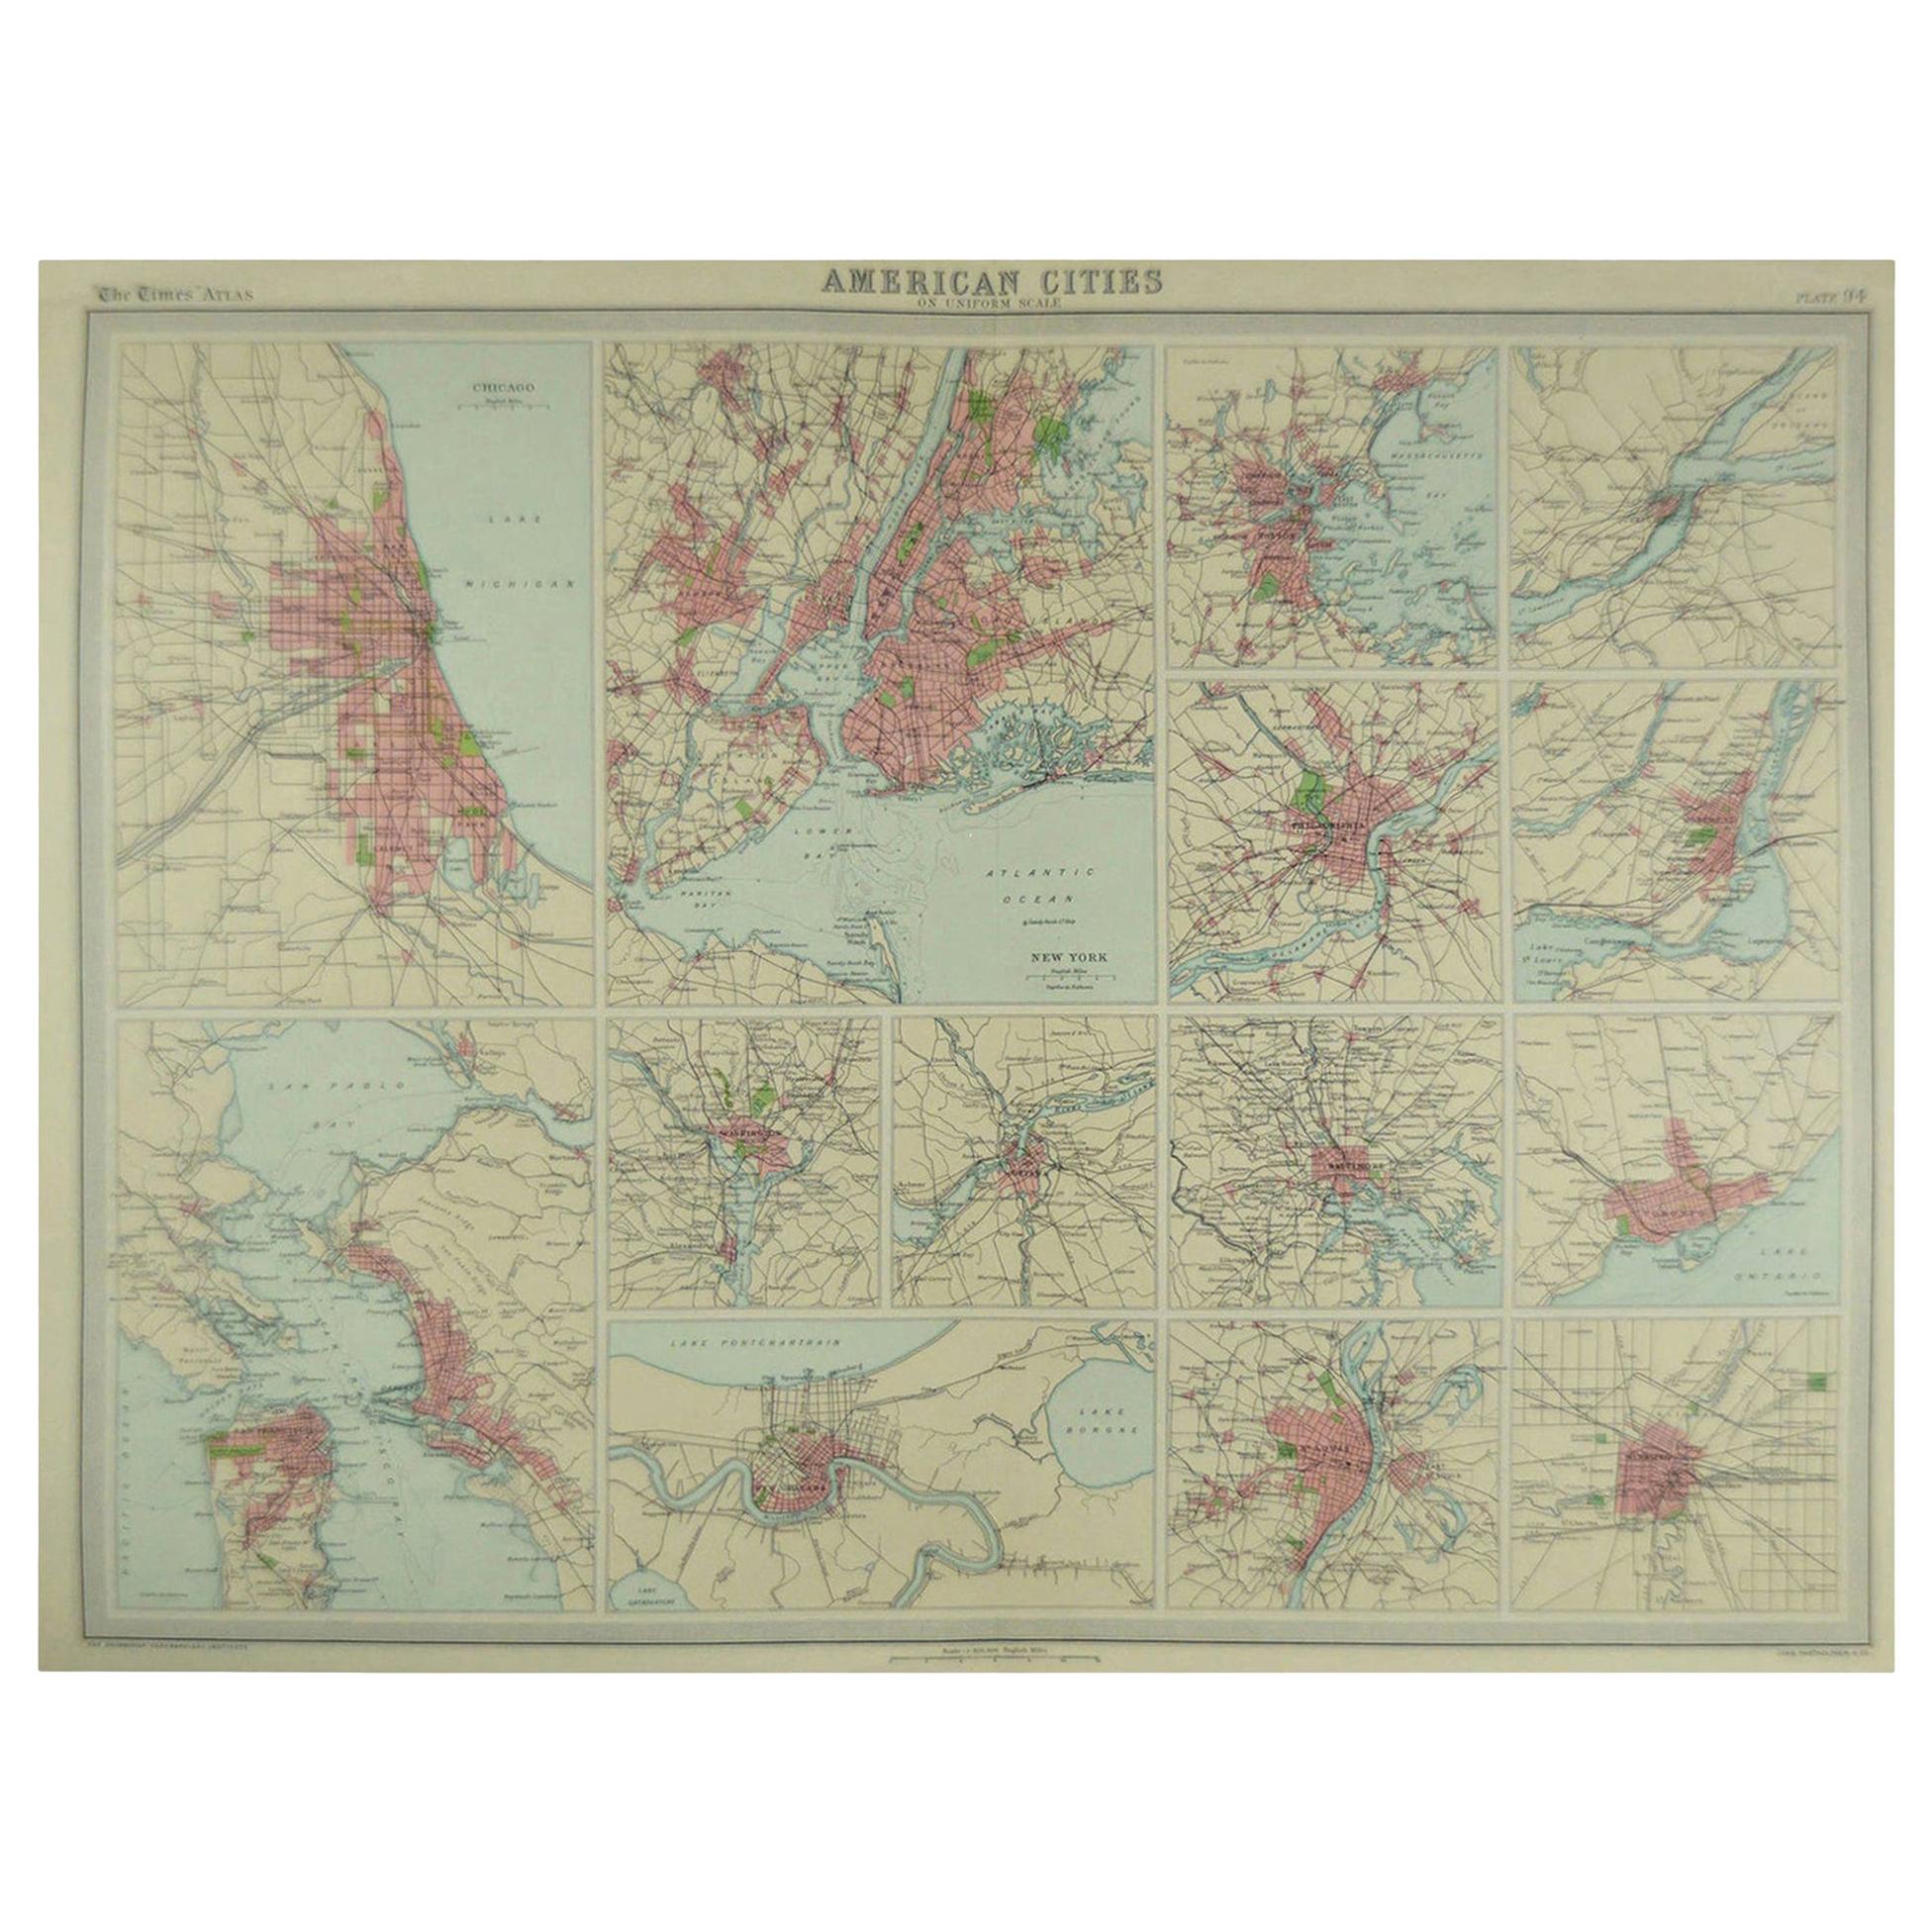 Great maps of American Cities

Unframed

Original color

By John Bartholomew and Co. Edinburgh Geographical Institute

Published, circa 1920

Free shipping.
  